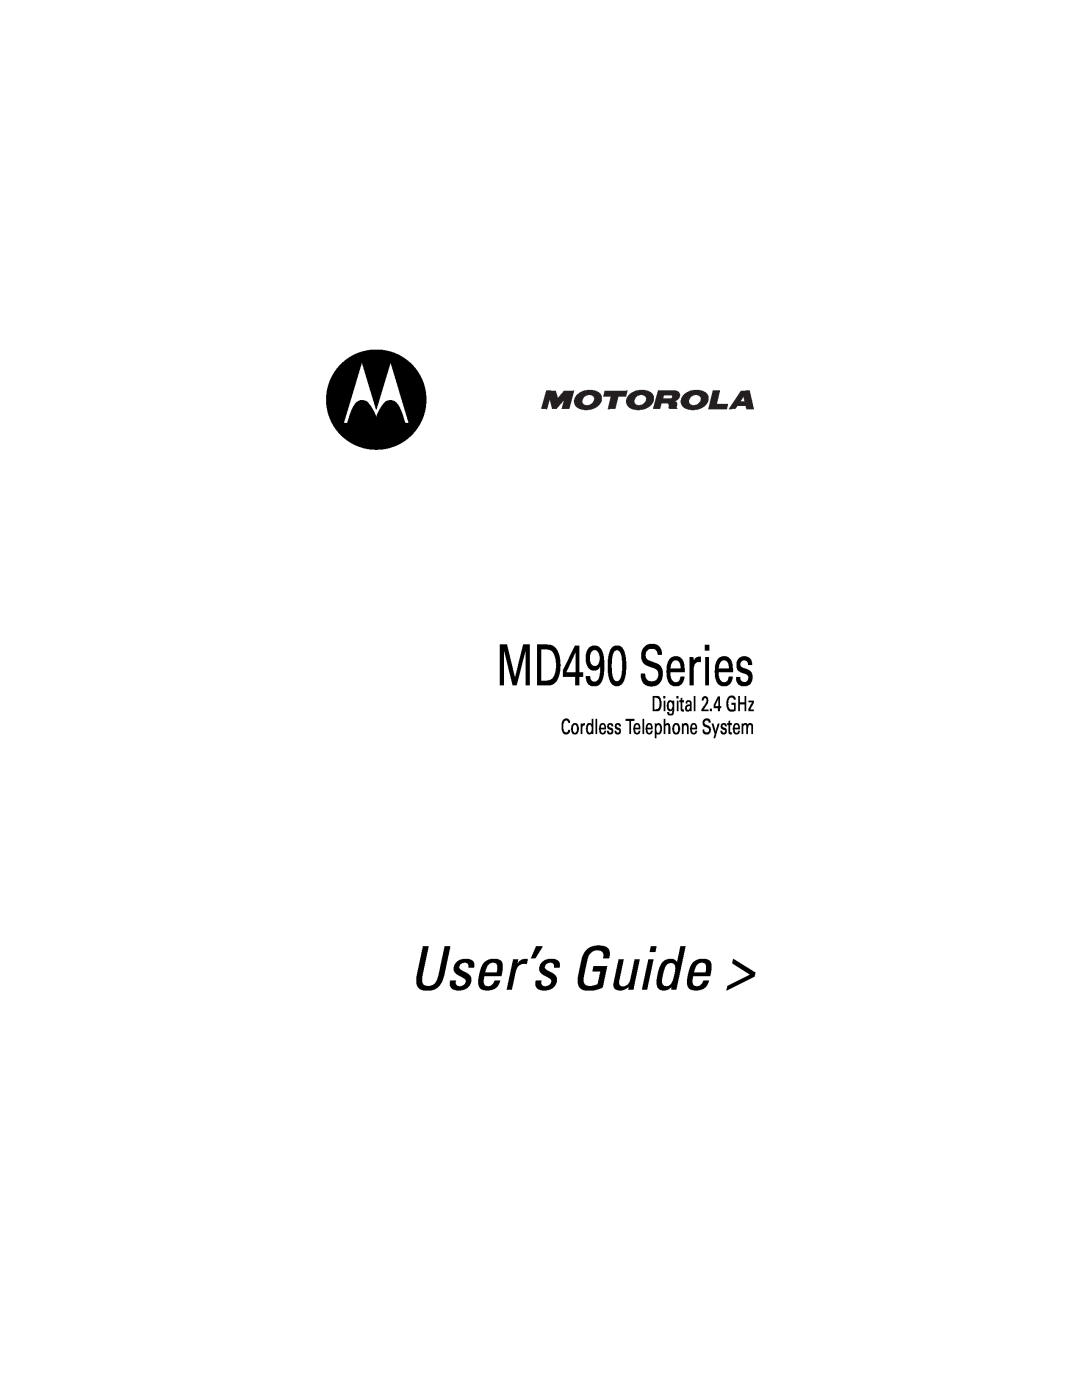 Motorola manual User’s Guide, MD490 Series, Digital 2.4 GHz Cordless Telephone System 